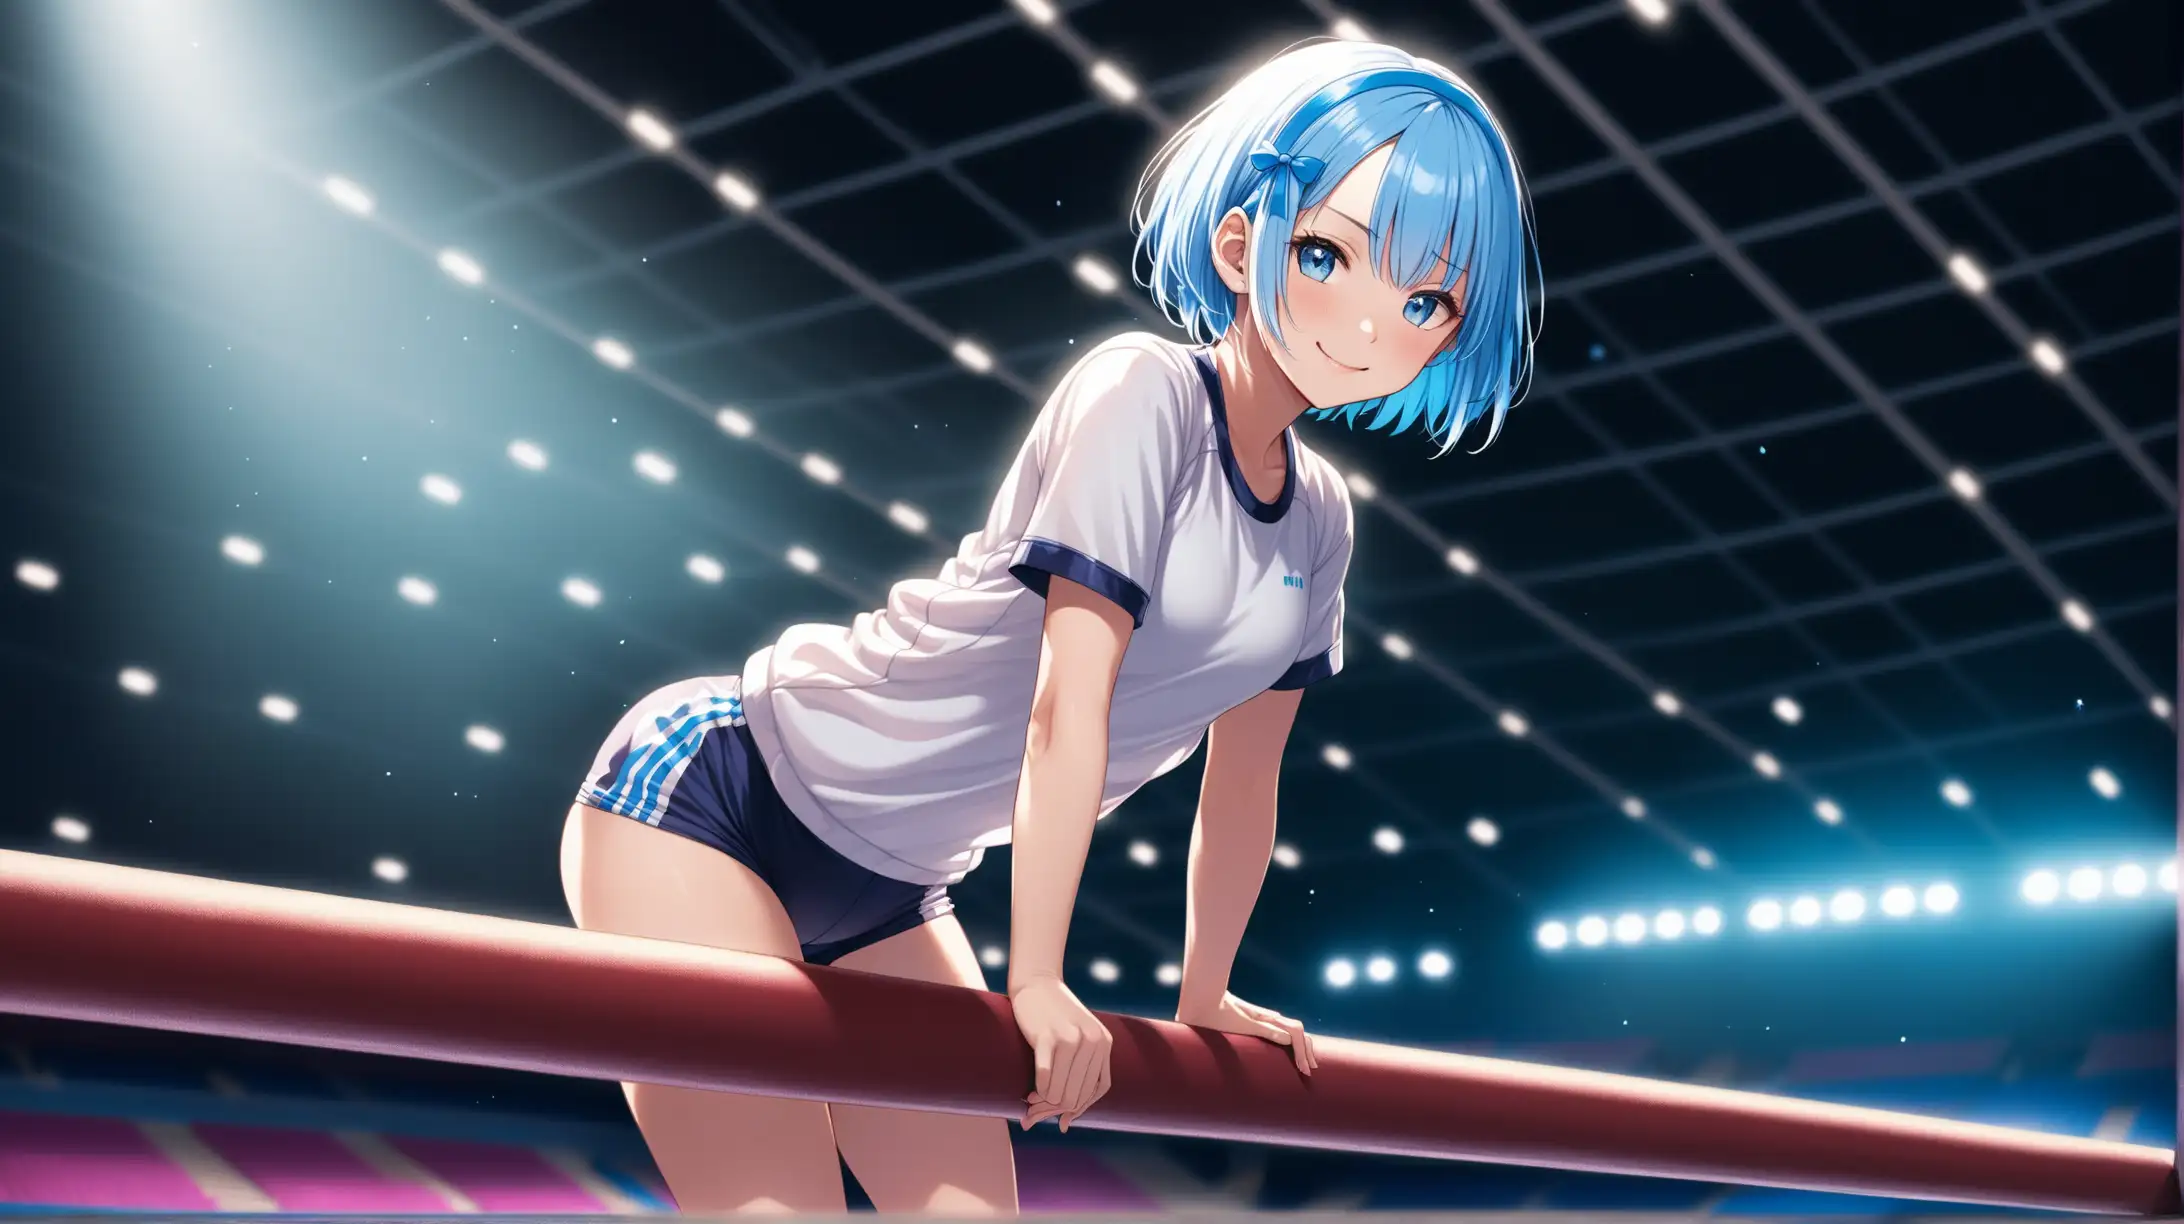 Draw the character Rem, high quality, indoors, in a gymnastics arena, medium shot, dynamic lighting, in a confident pose, on a gymnastics beam, wearing gym clothes, smiling at the viewer